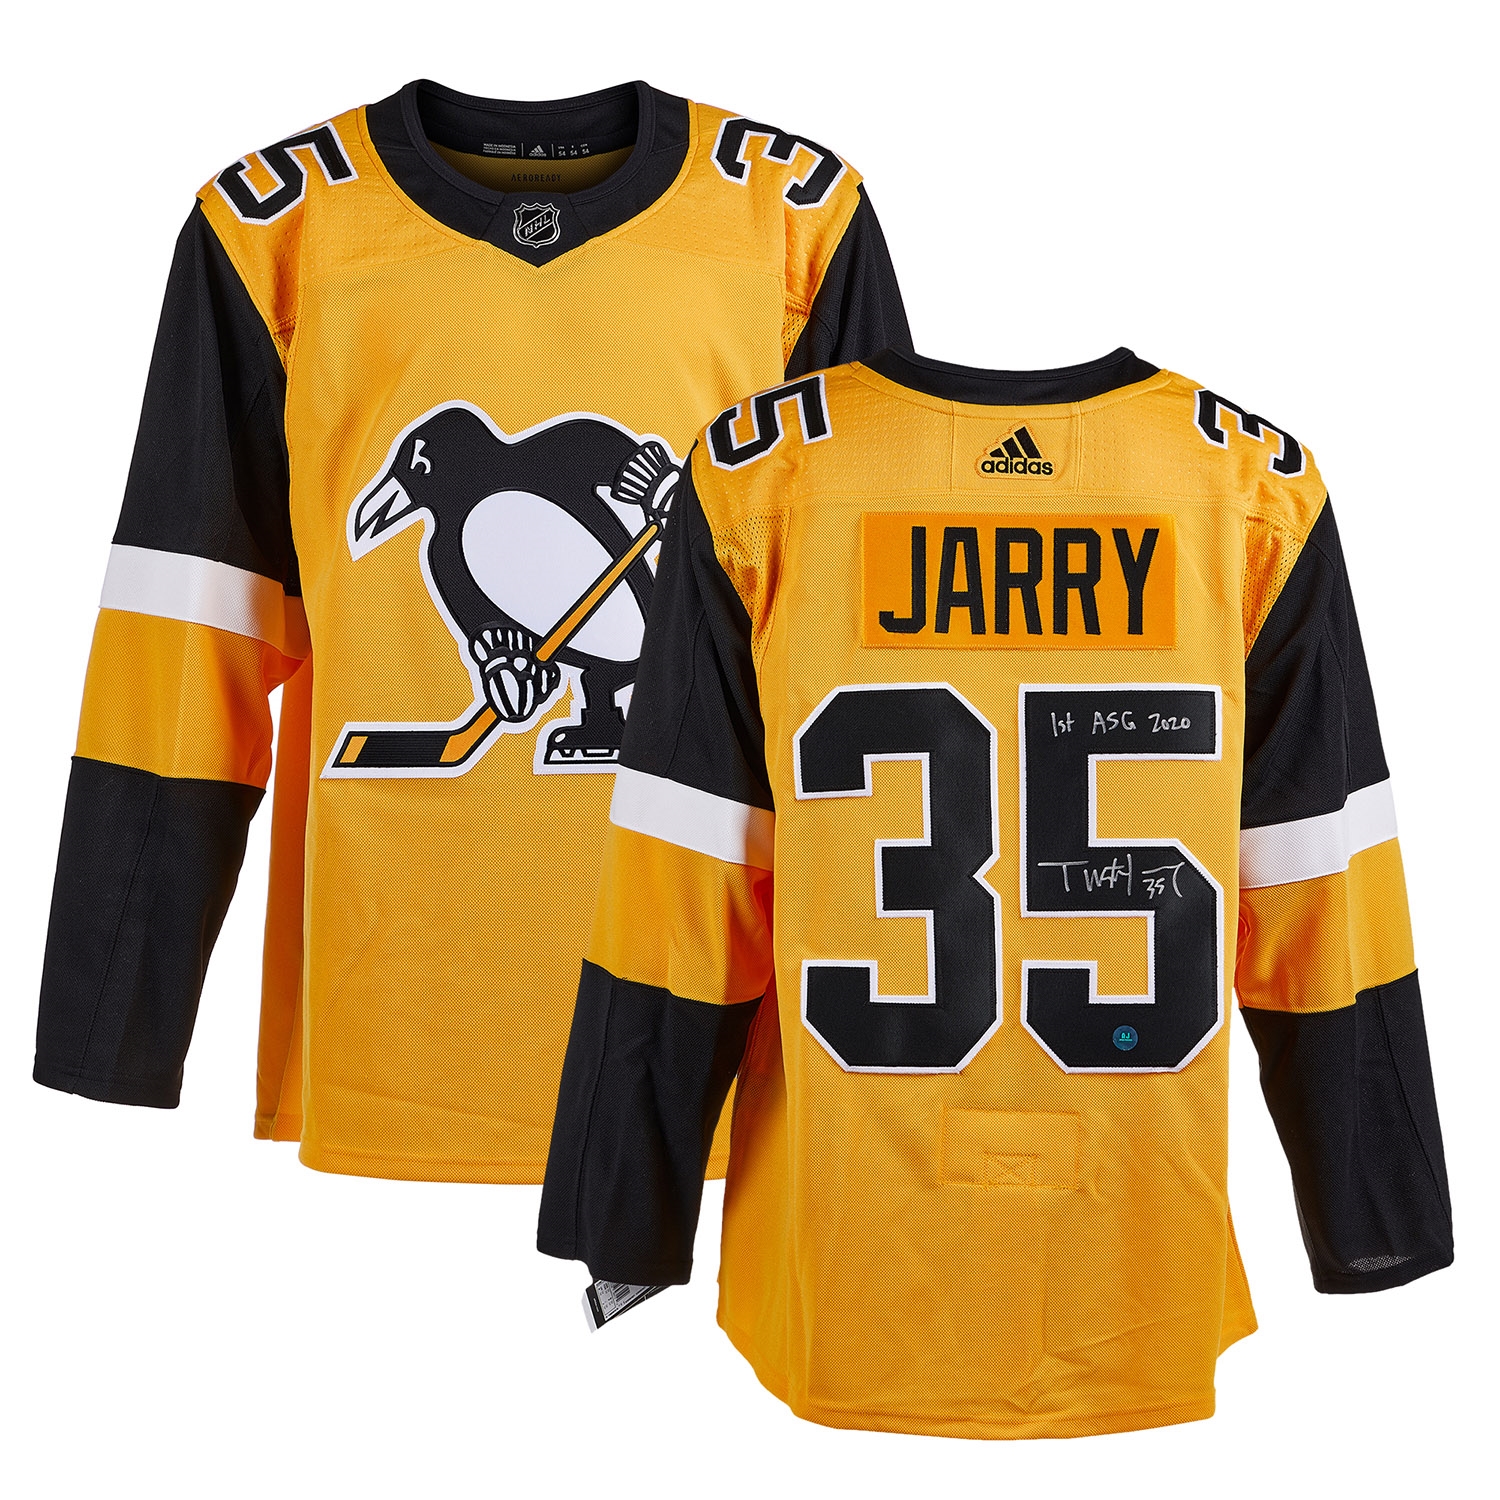 Tristan Jarry Pittsburgh Penguins Signed Alt adidas Jersey with 1st All Star note